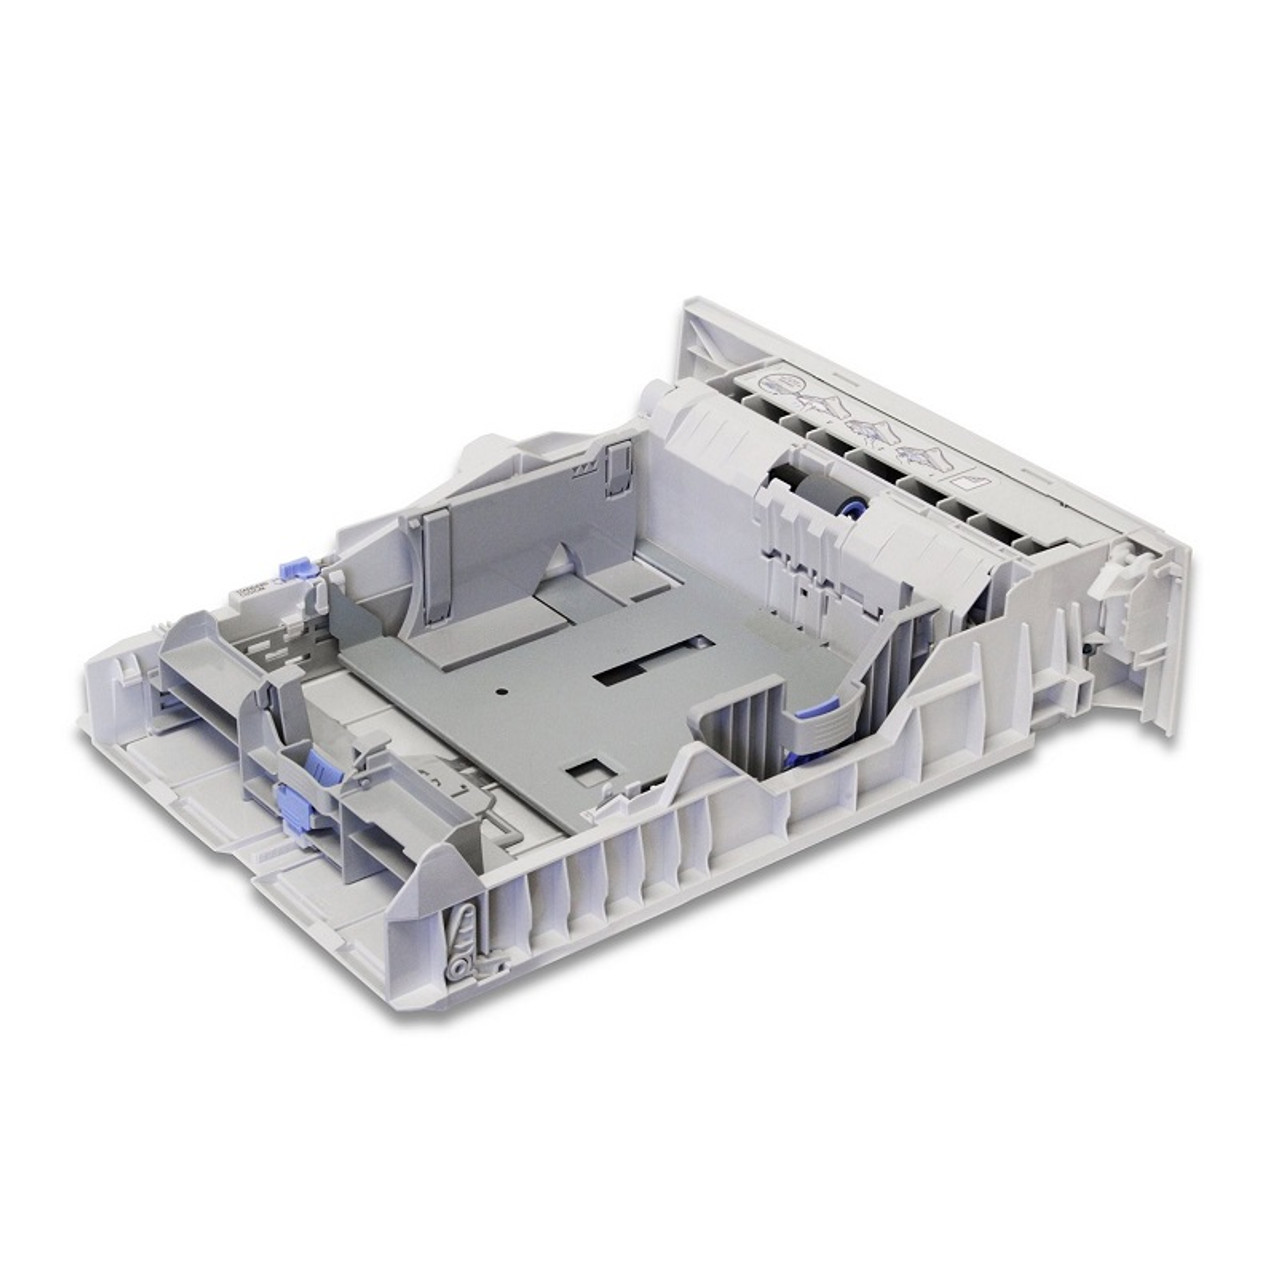 RB2-3001 - HP 250-Sheets Paper Input Tray for LaserJet 2200 Series Printer (Refurbished / Grade-A)